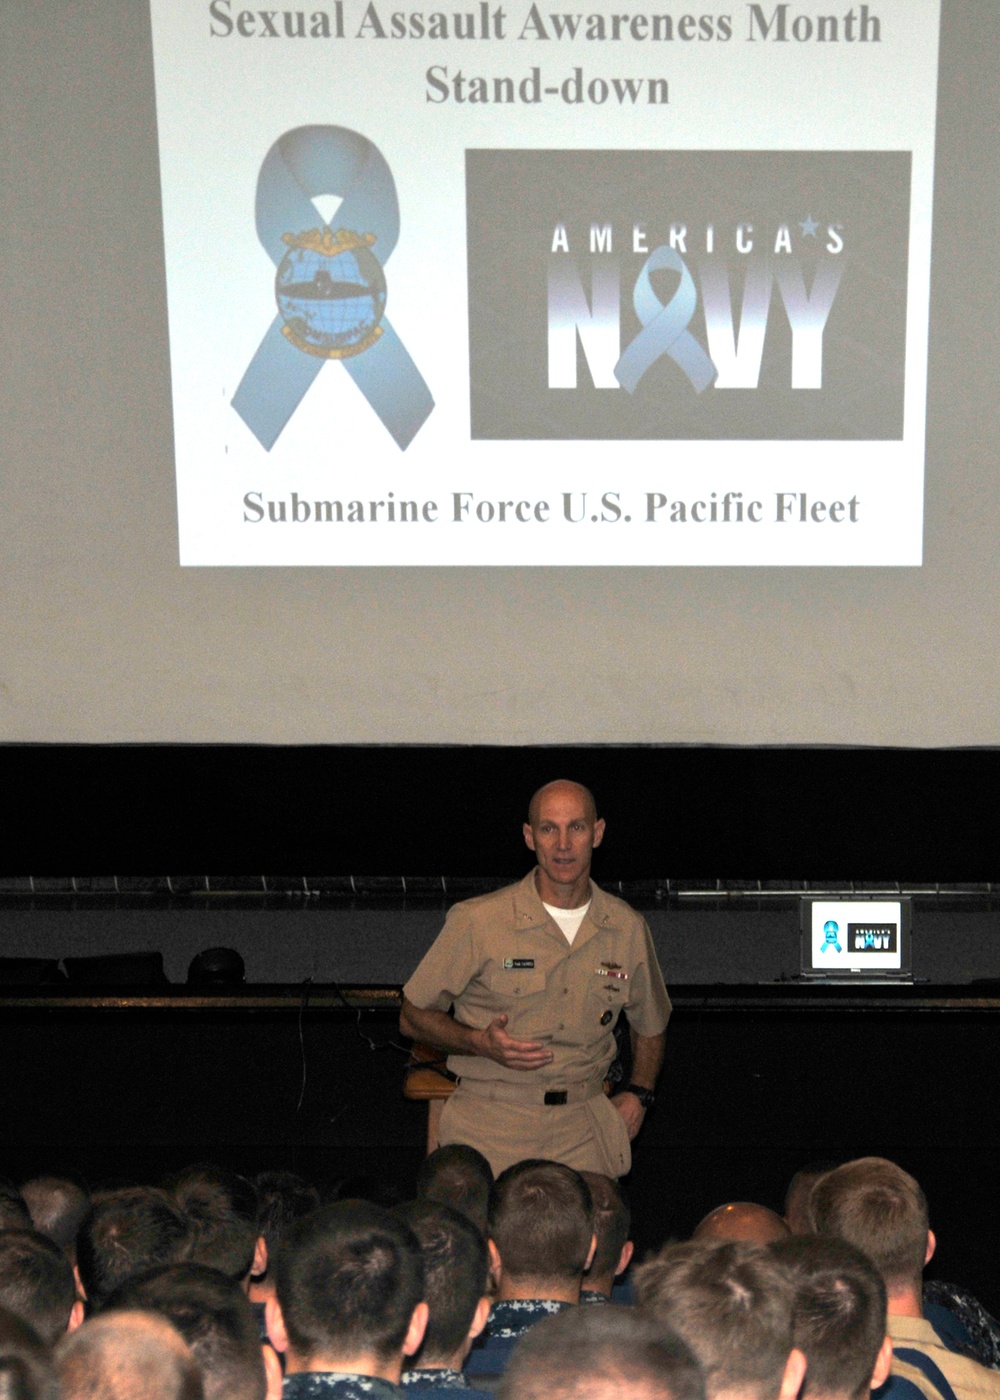 Sexual assault awareness event at Joint Base Pearl Harbor-Hickam